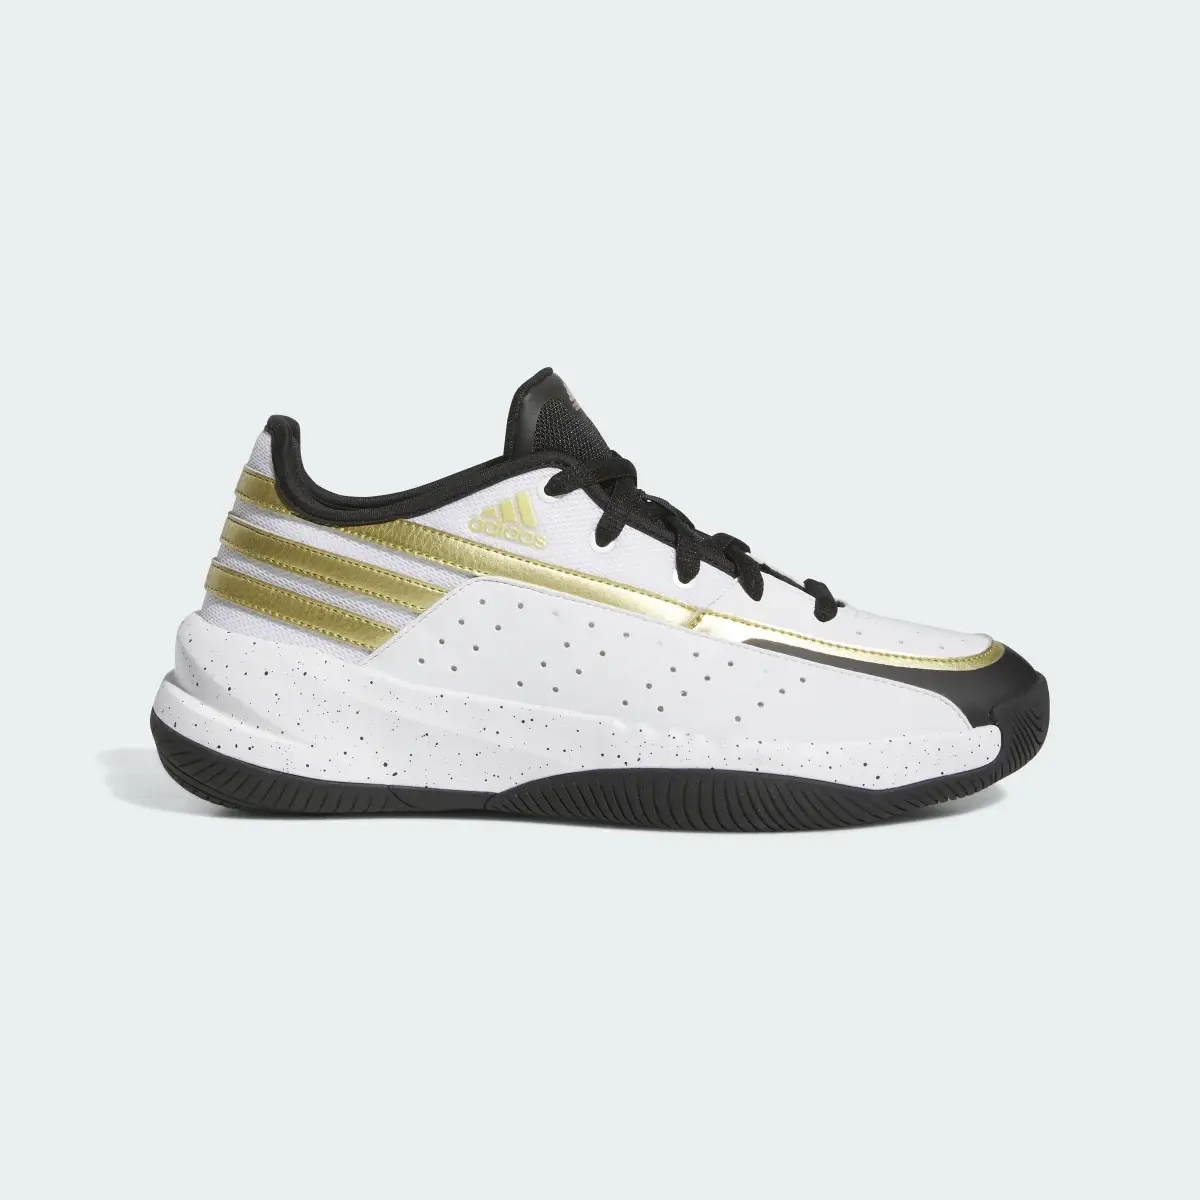 Adidas Front Court Shoes. 2